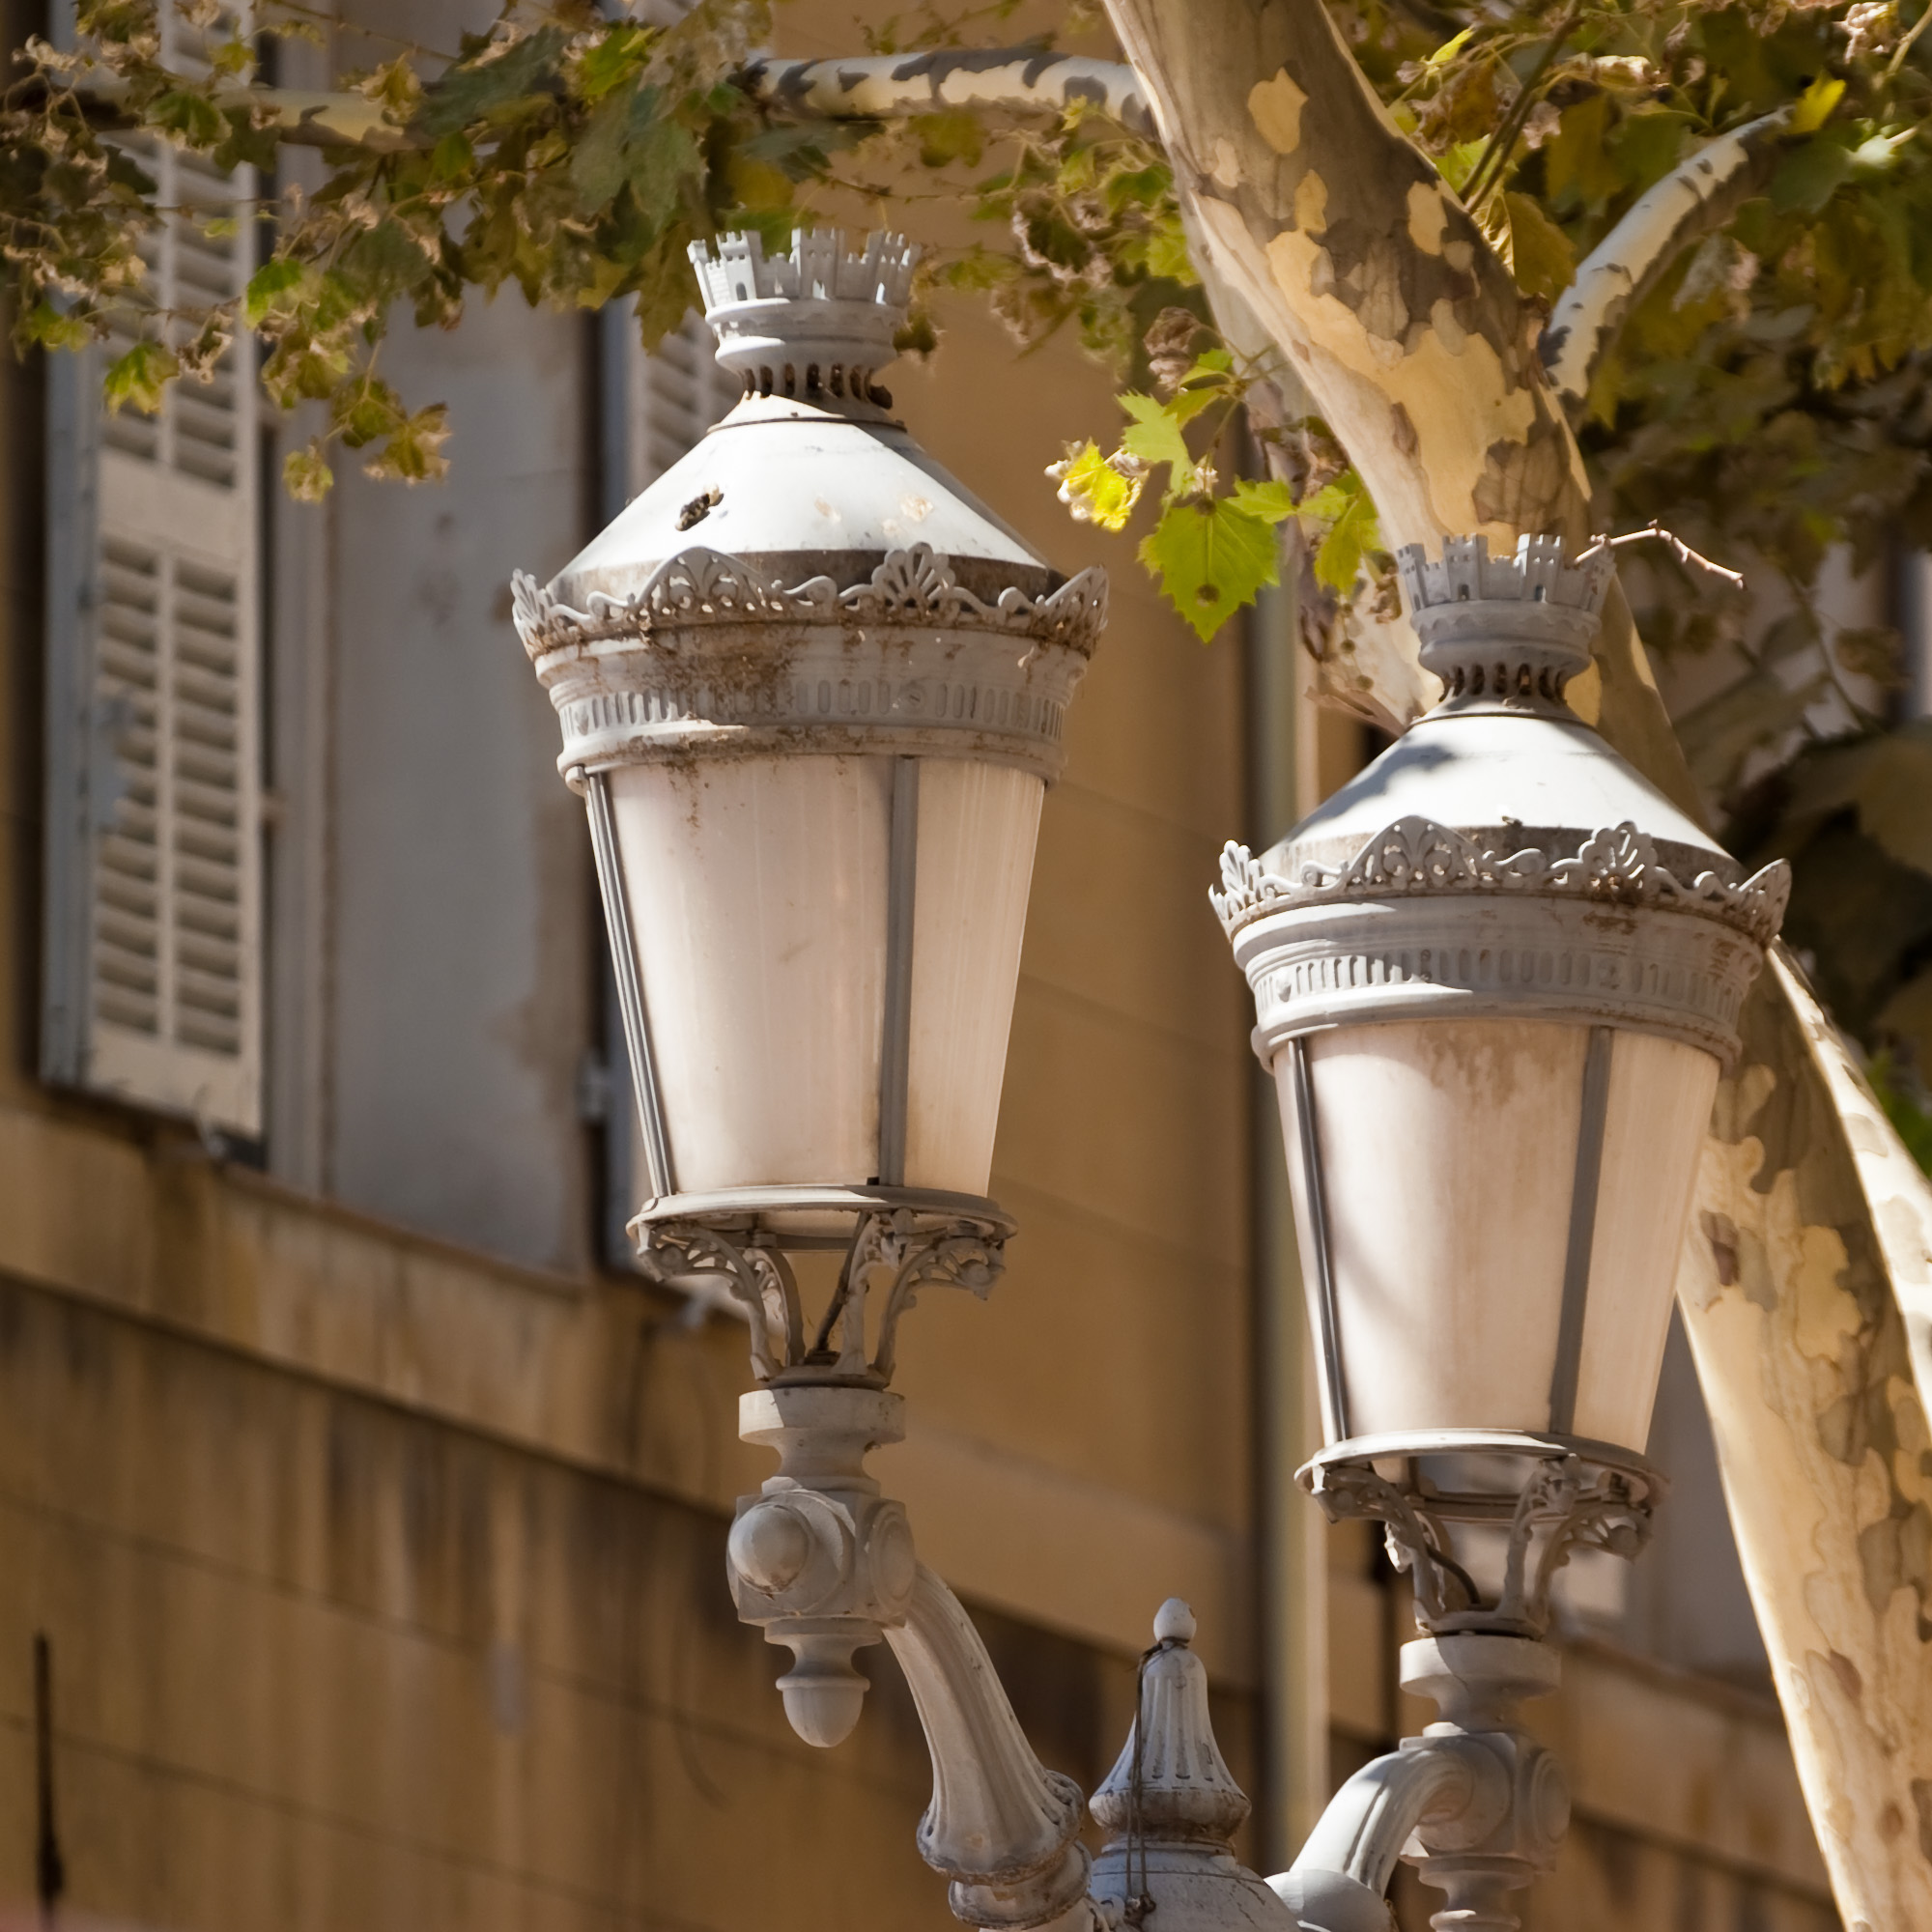 Provence - Rulerly light in Aix